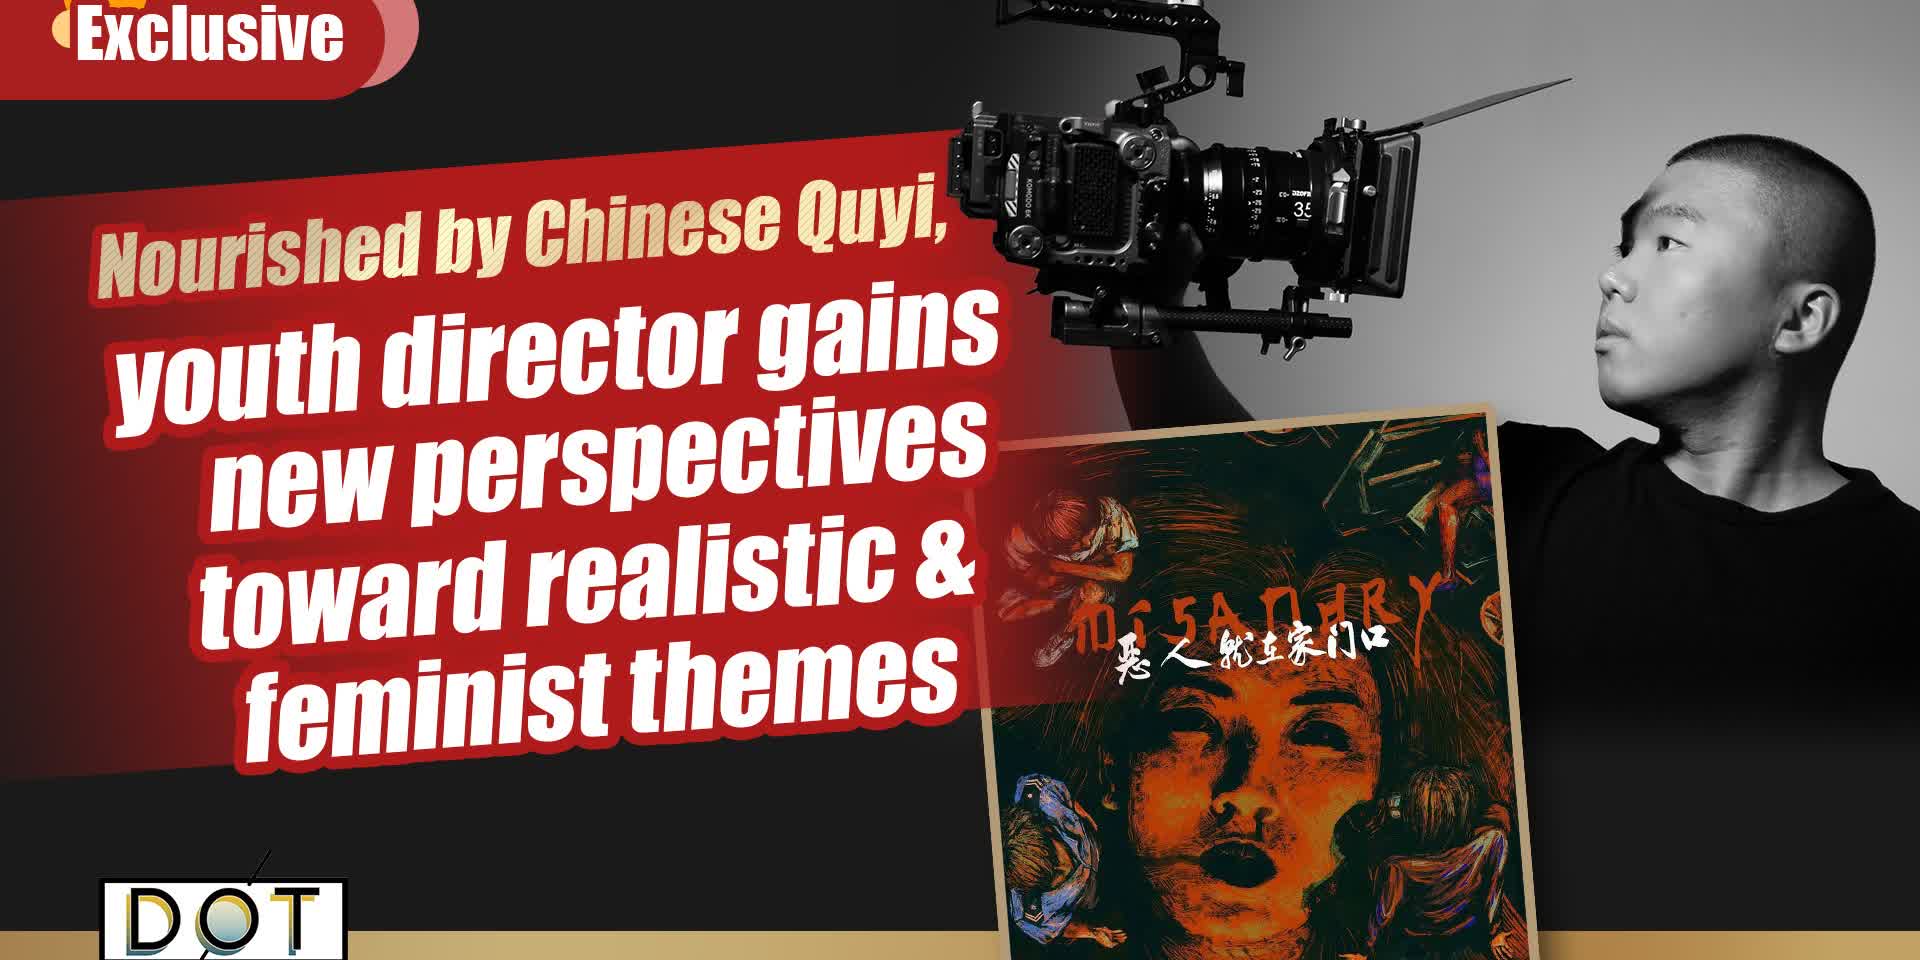 Exclusive | Nourished by Chinese Quyi, youth director gains new perspectives toward realistic, feminist themes